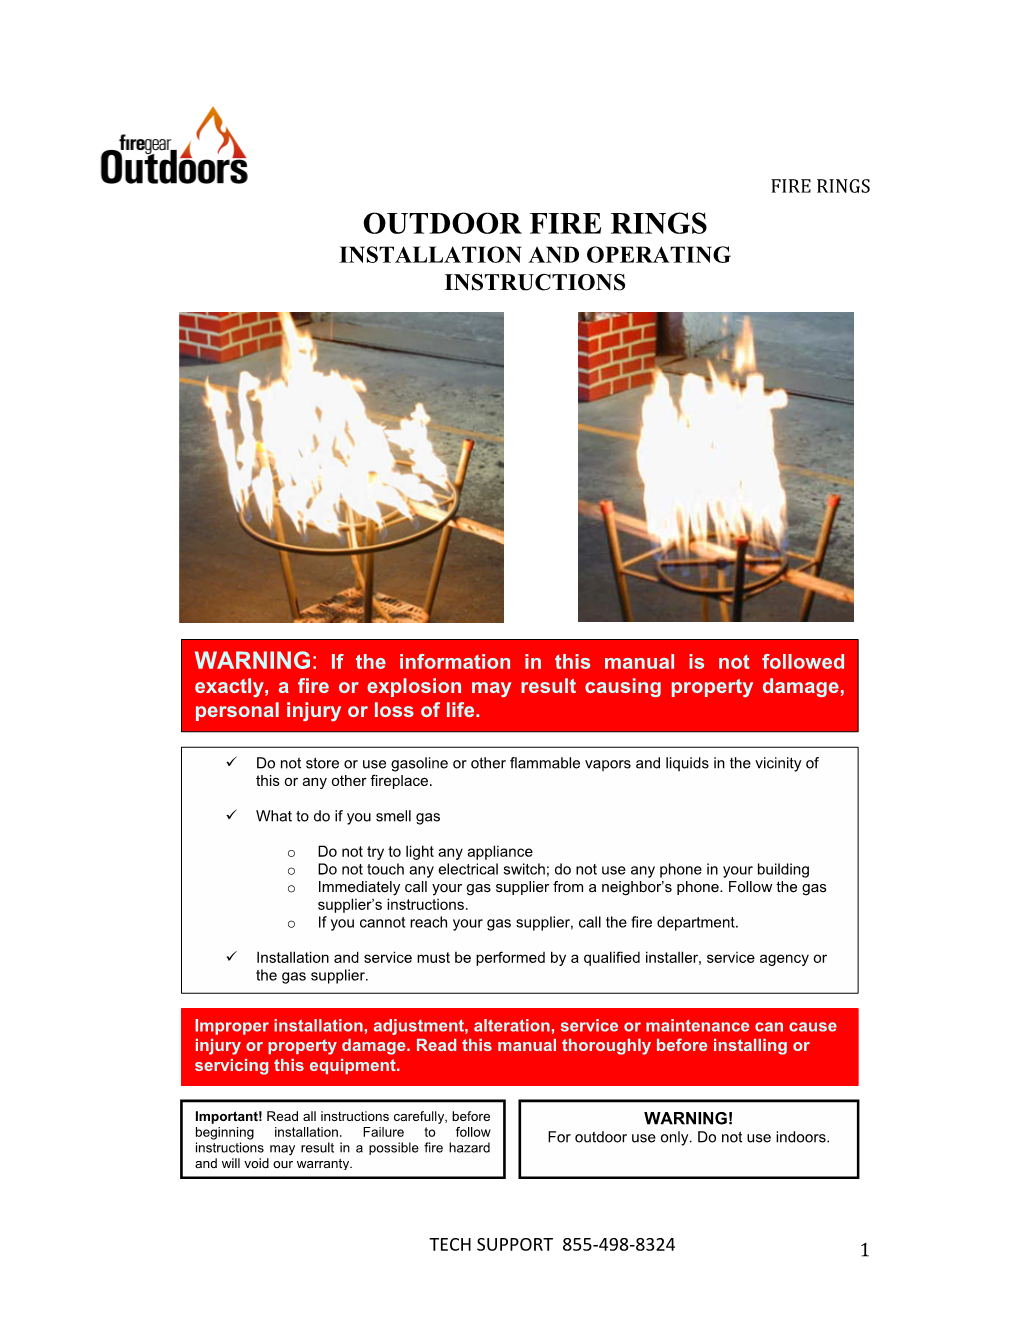 Fire Ring Instructions 8-4-14